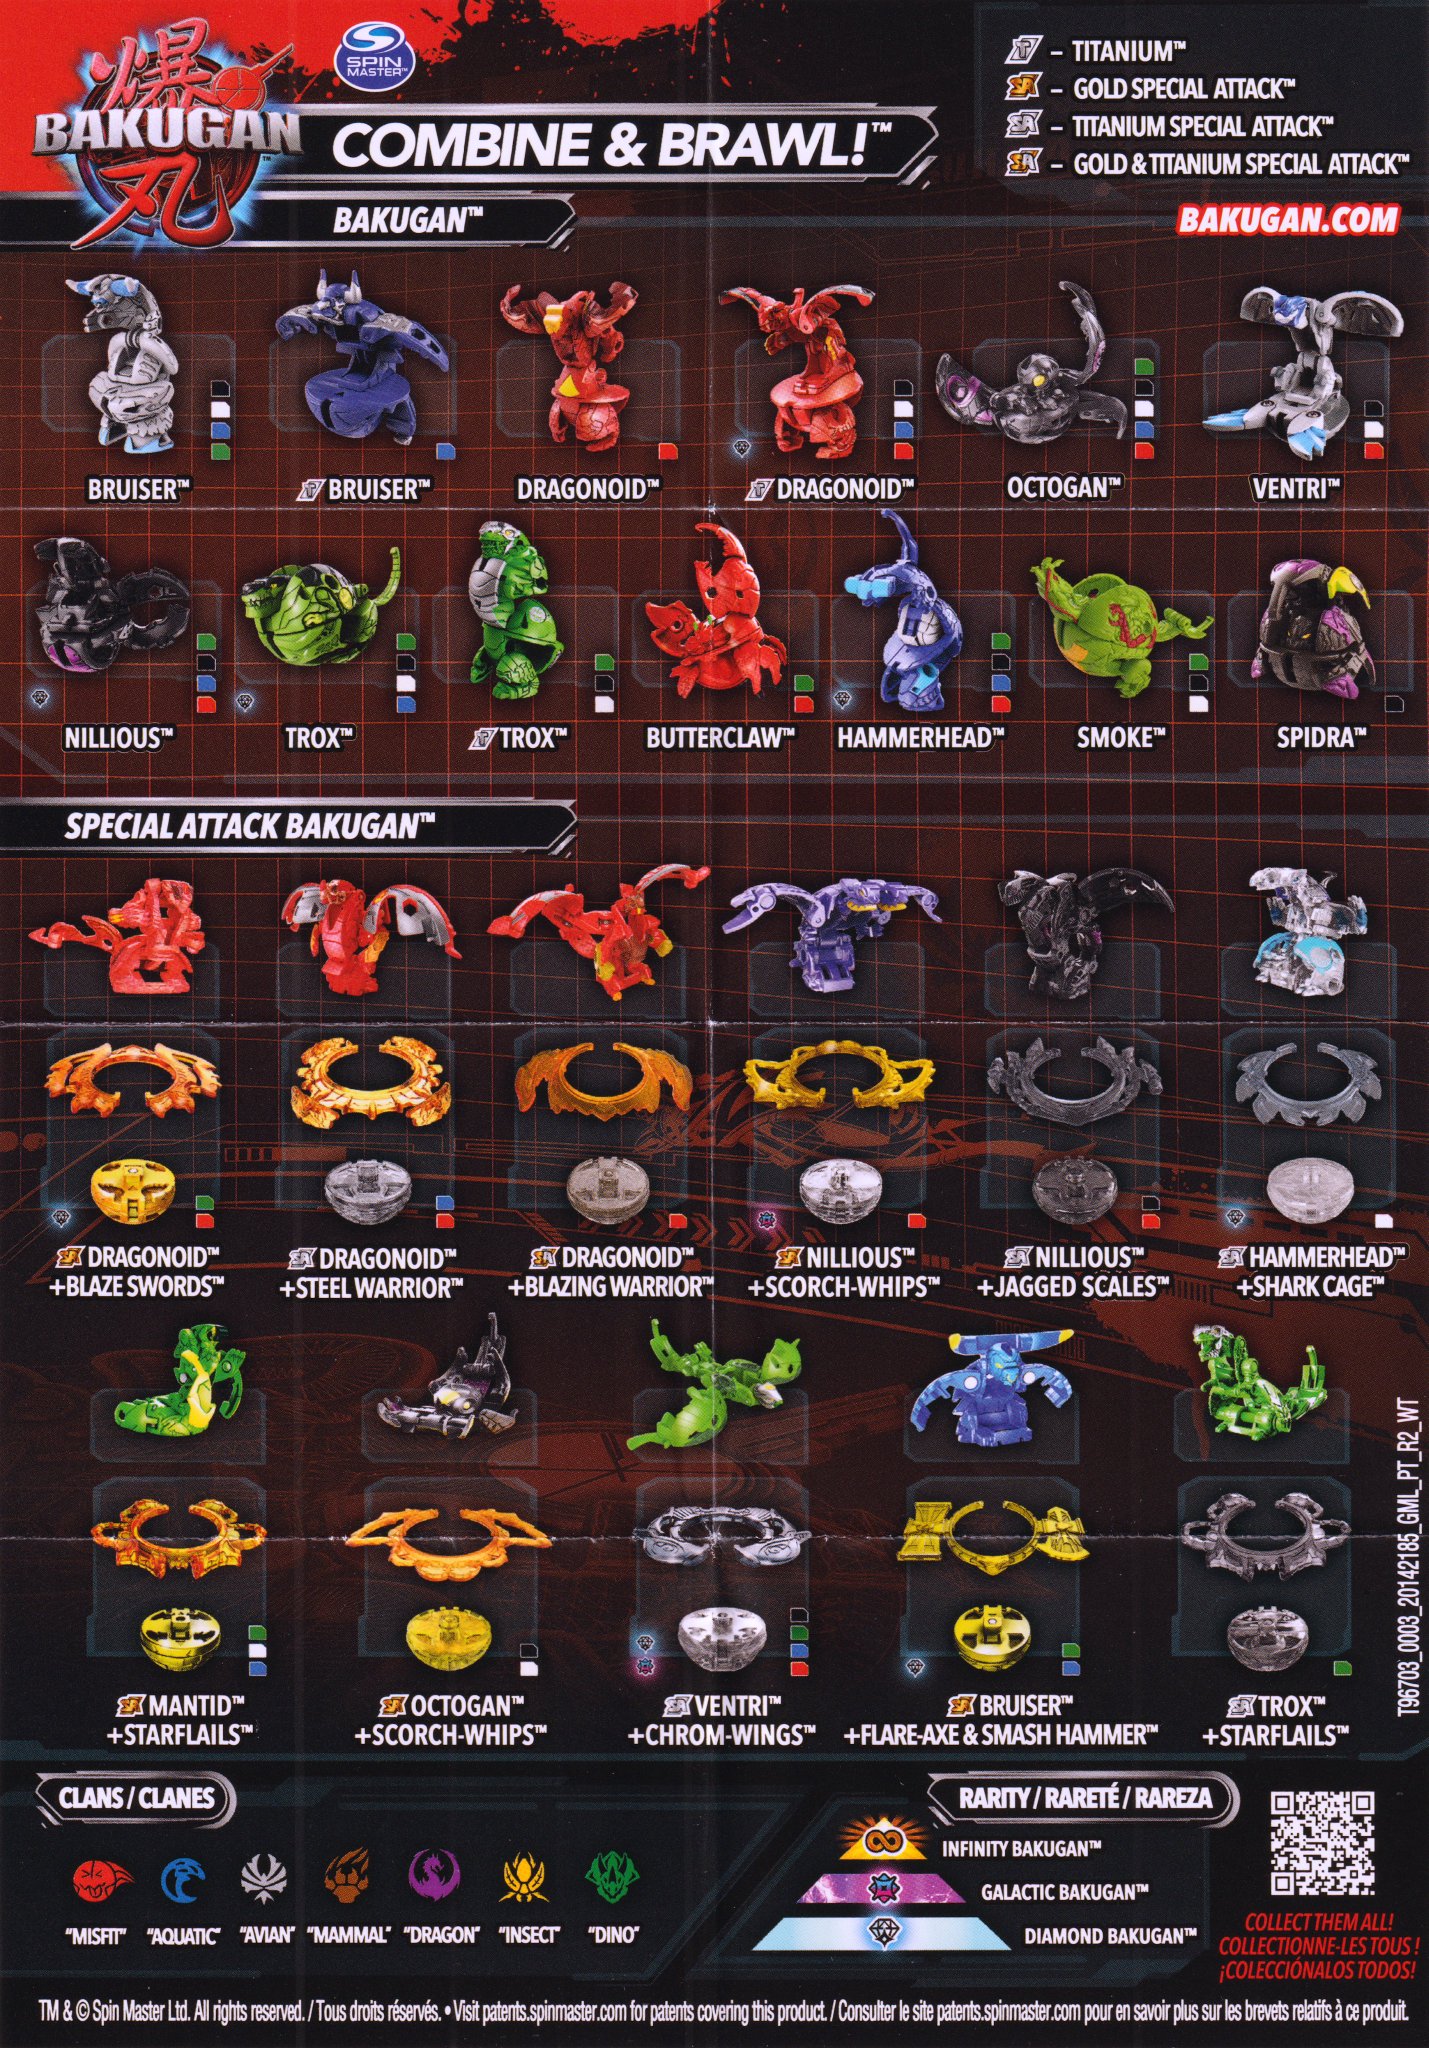 Bakugan Wiki on X: The Bakugan Wiki now has a full scan of the